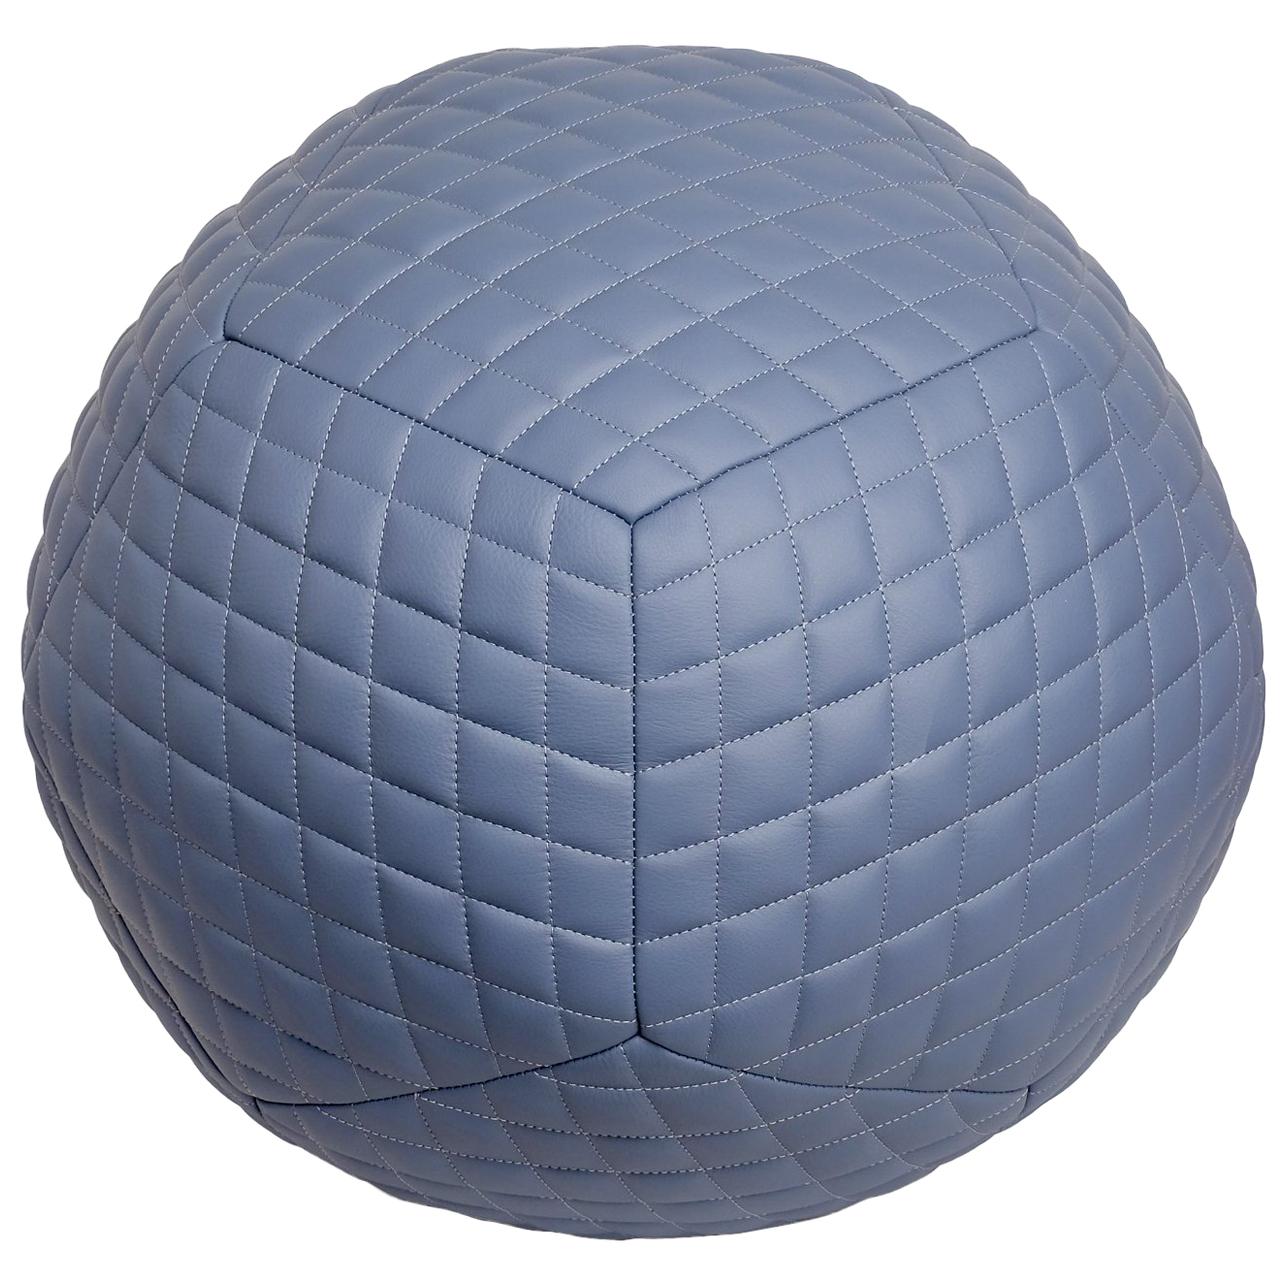 Diamond Ottoman 22"Ø in Slate Blue Leather by Moses Nadel For Sale